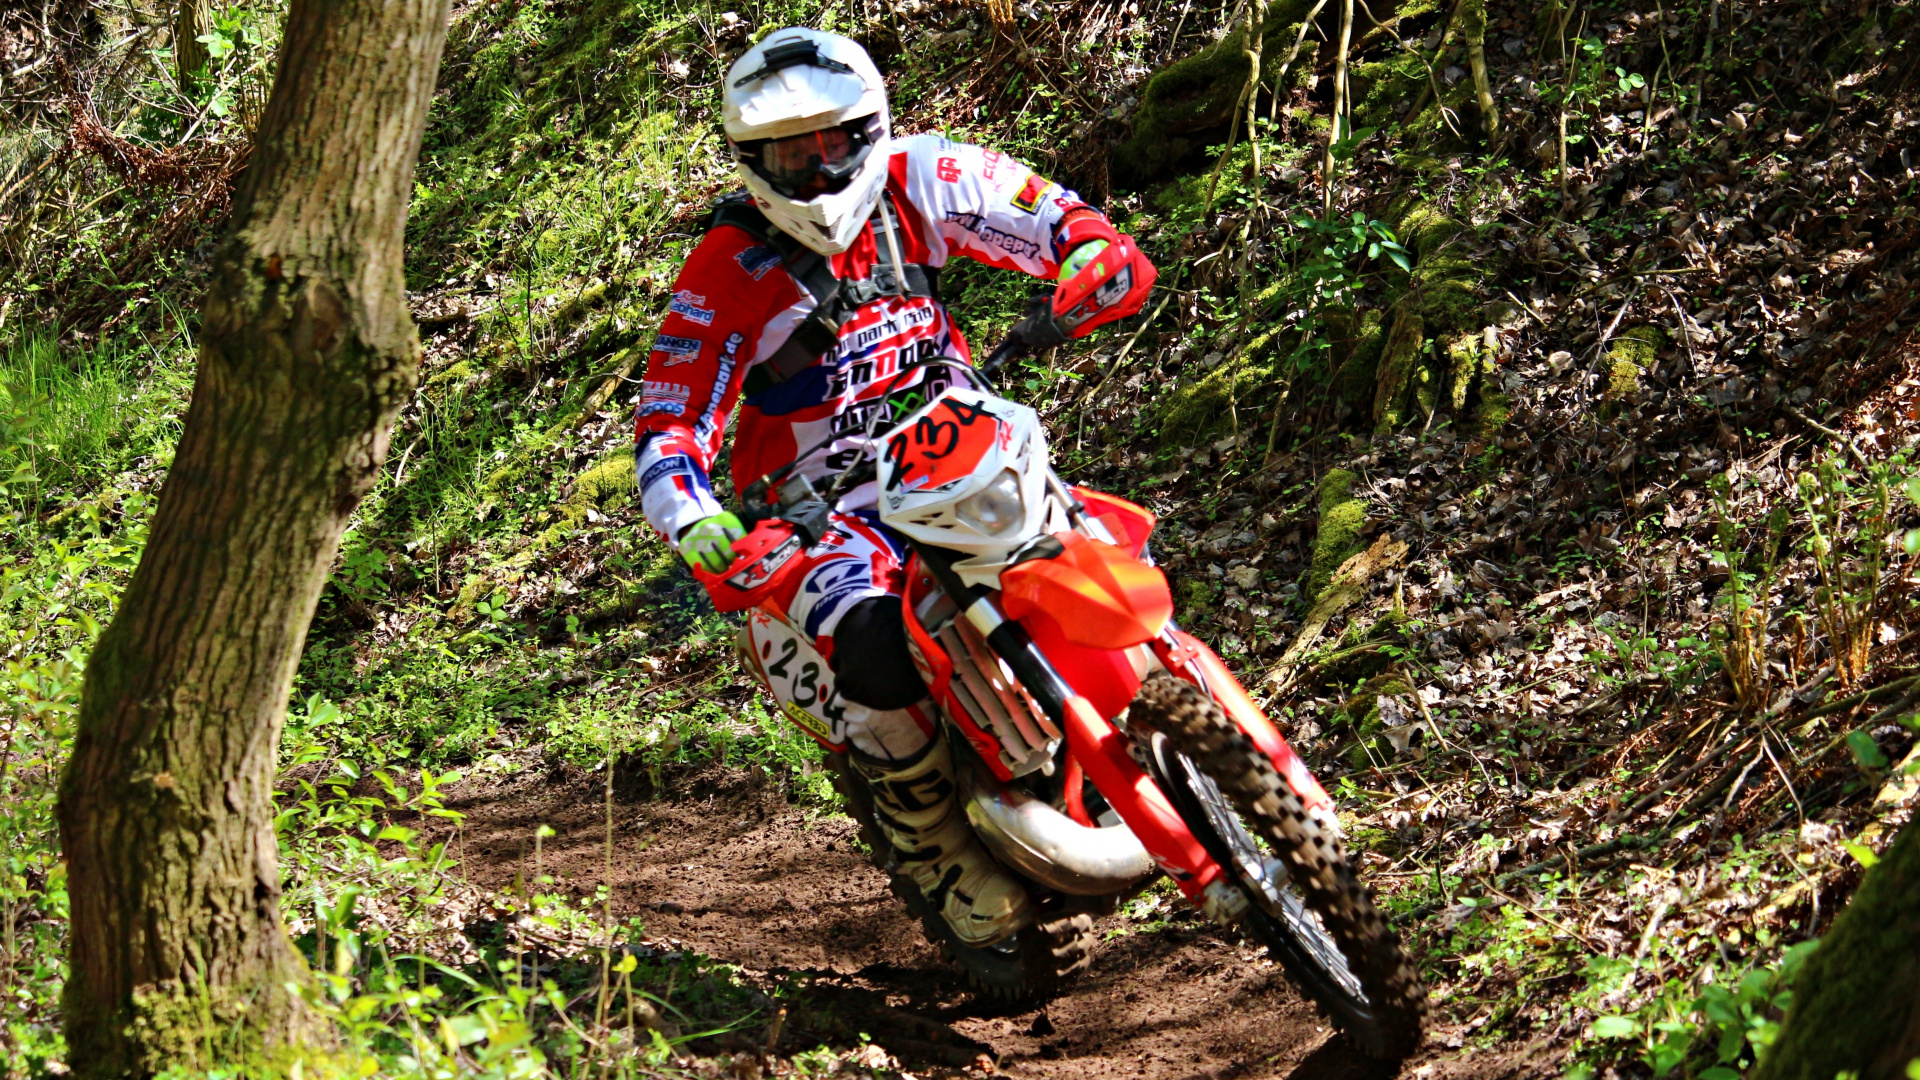 Man in Red and White Motocross Suit Riding Motocross Dirt Bike. Wallpaper in 1920x1080 Resolution